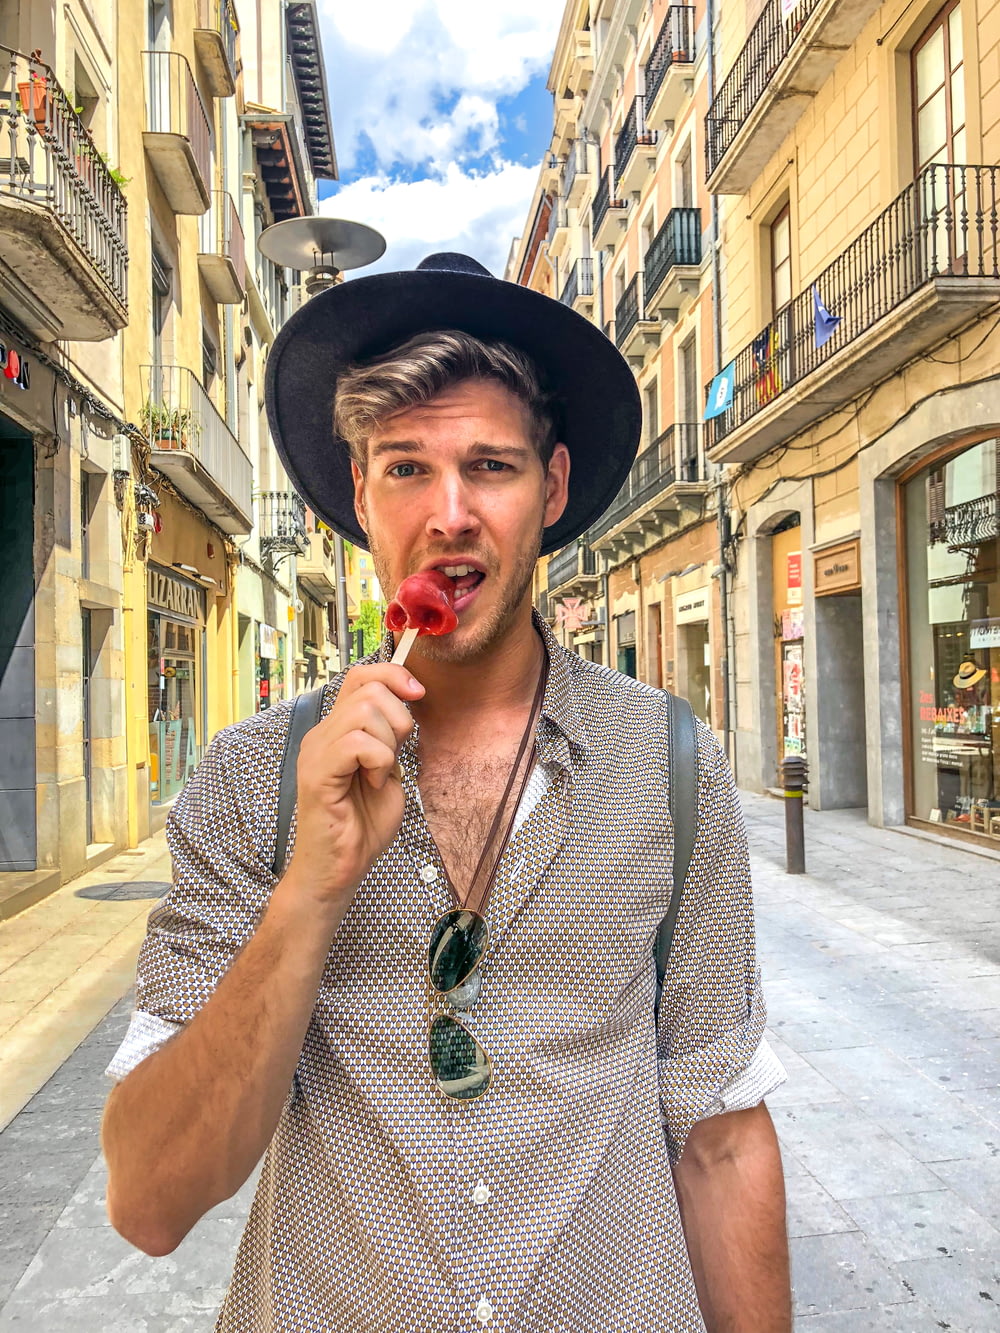 man wearing hat and grey shirt biting red candy on a stick